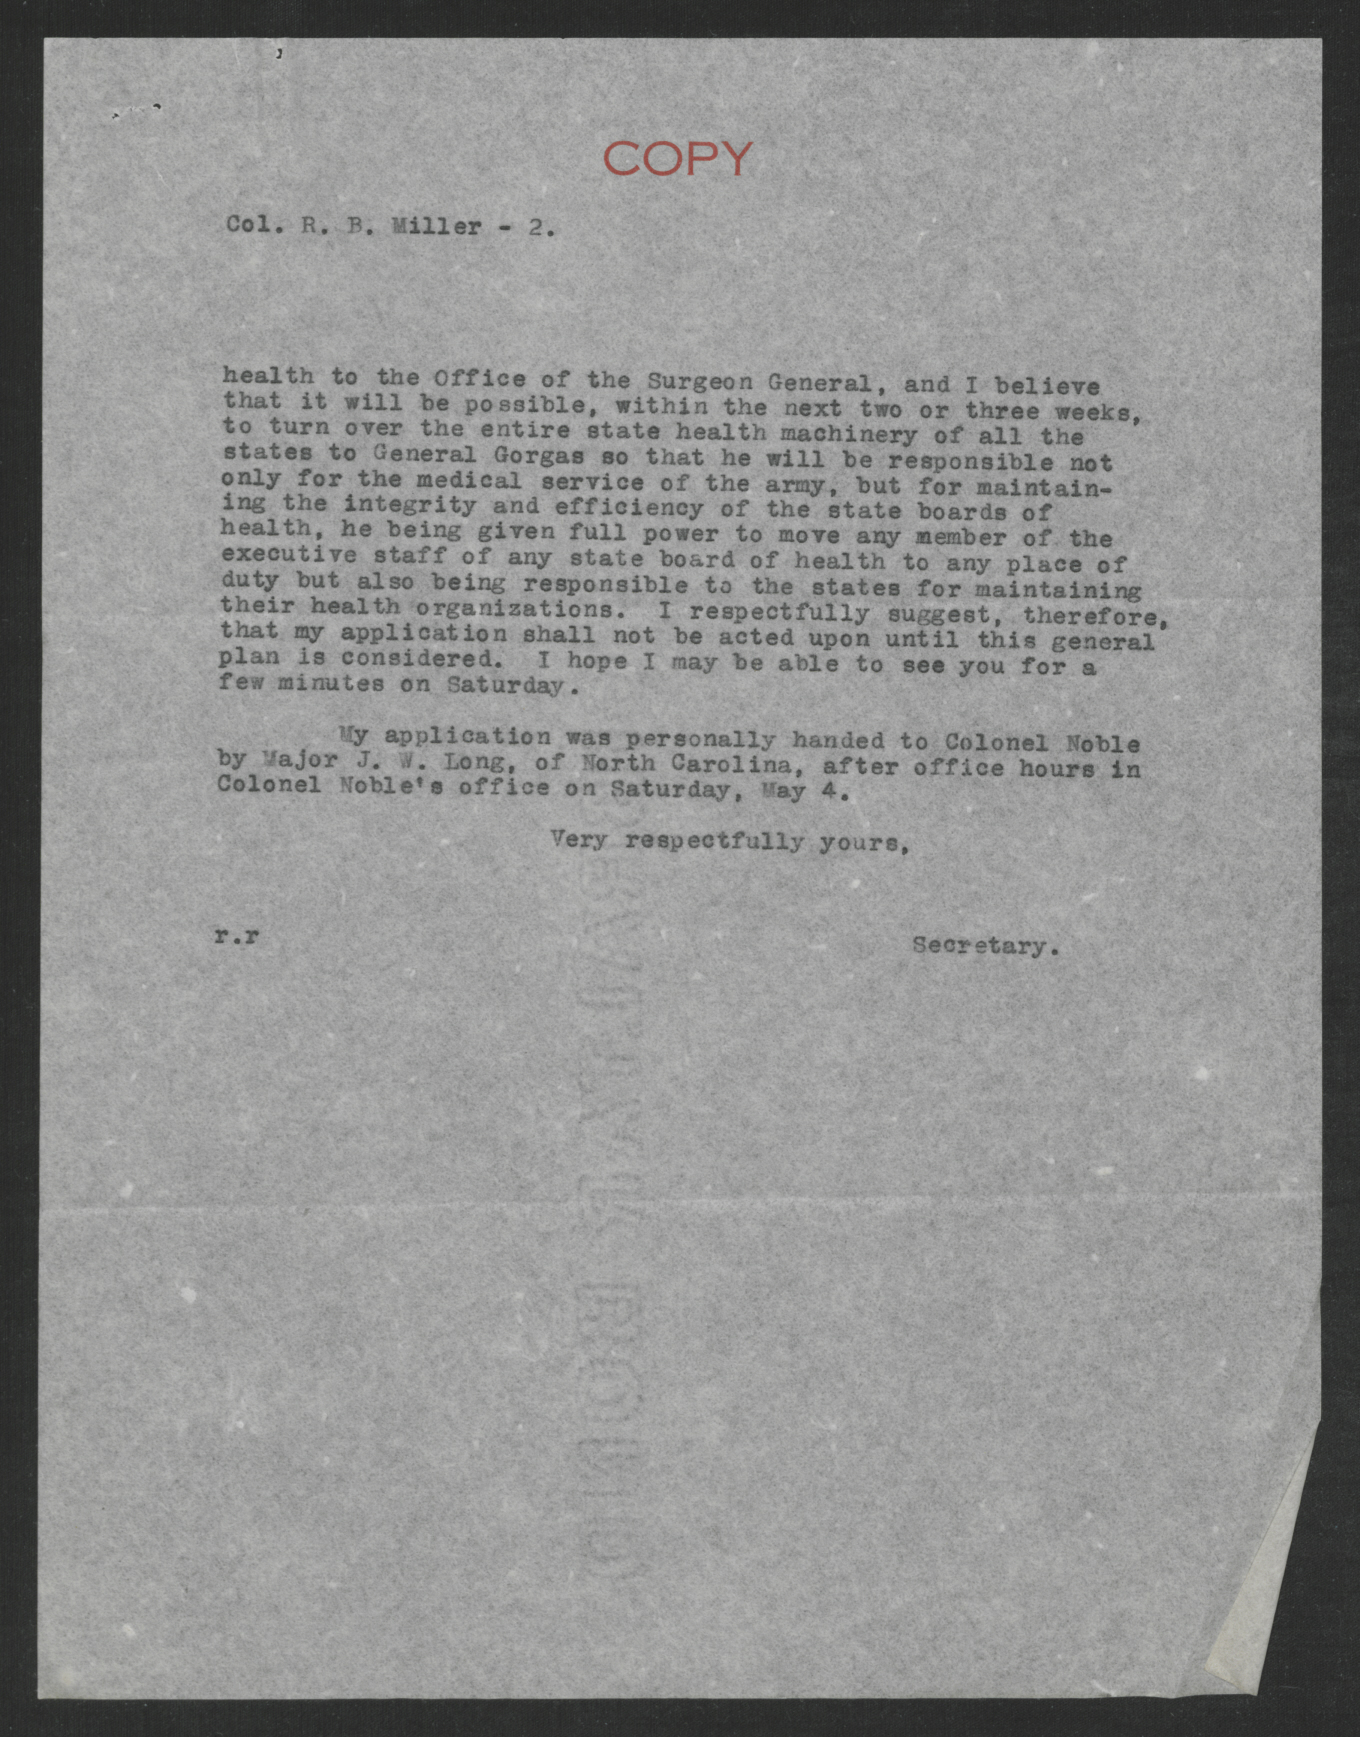 Letter from Watson S. Rankin to Reuben B. Miller, May 22, 1918, page 2